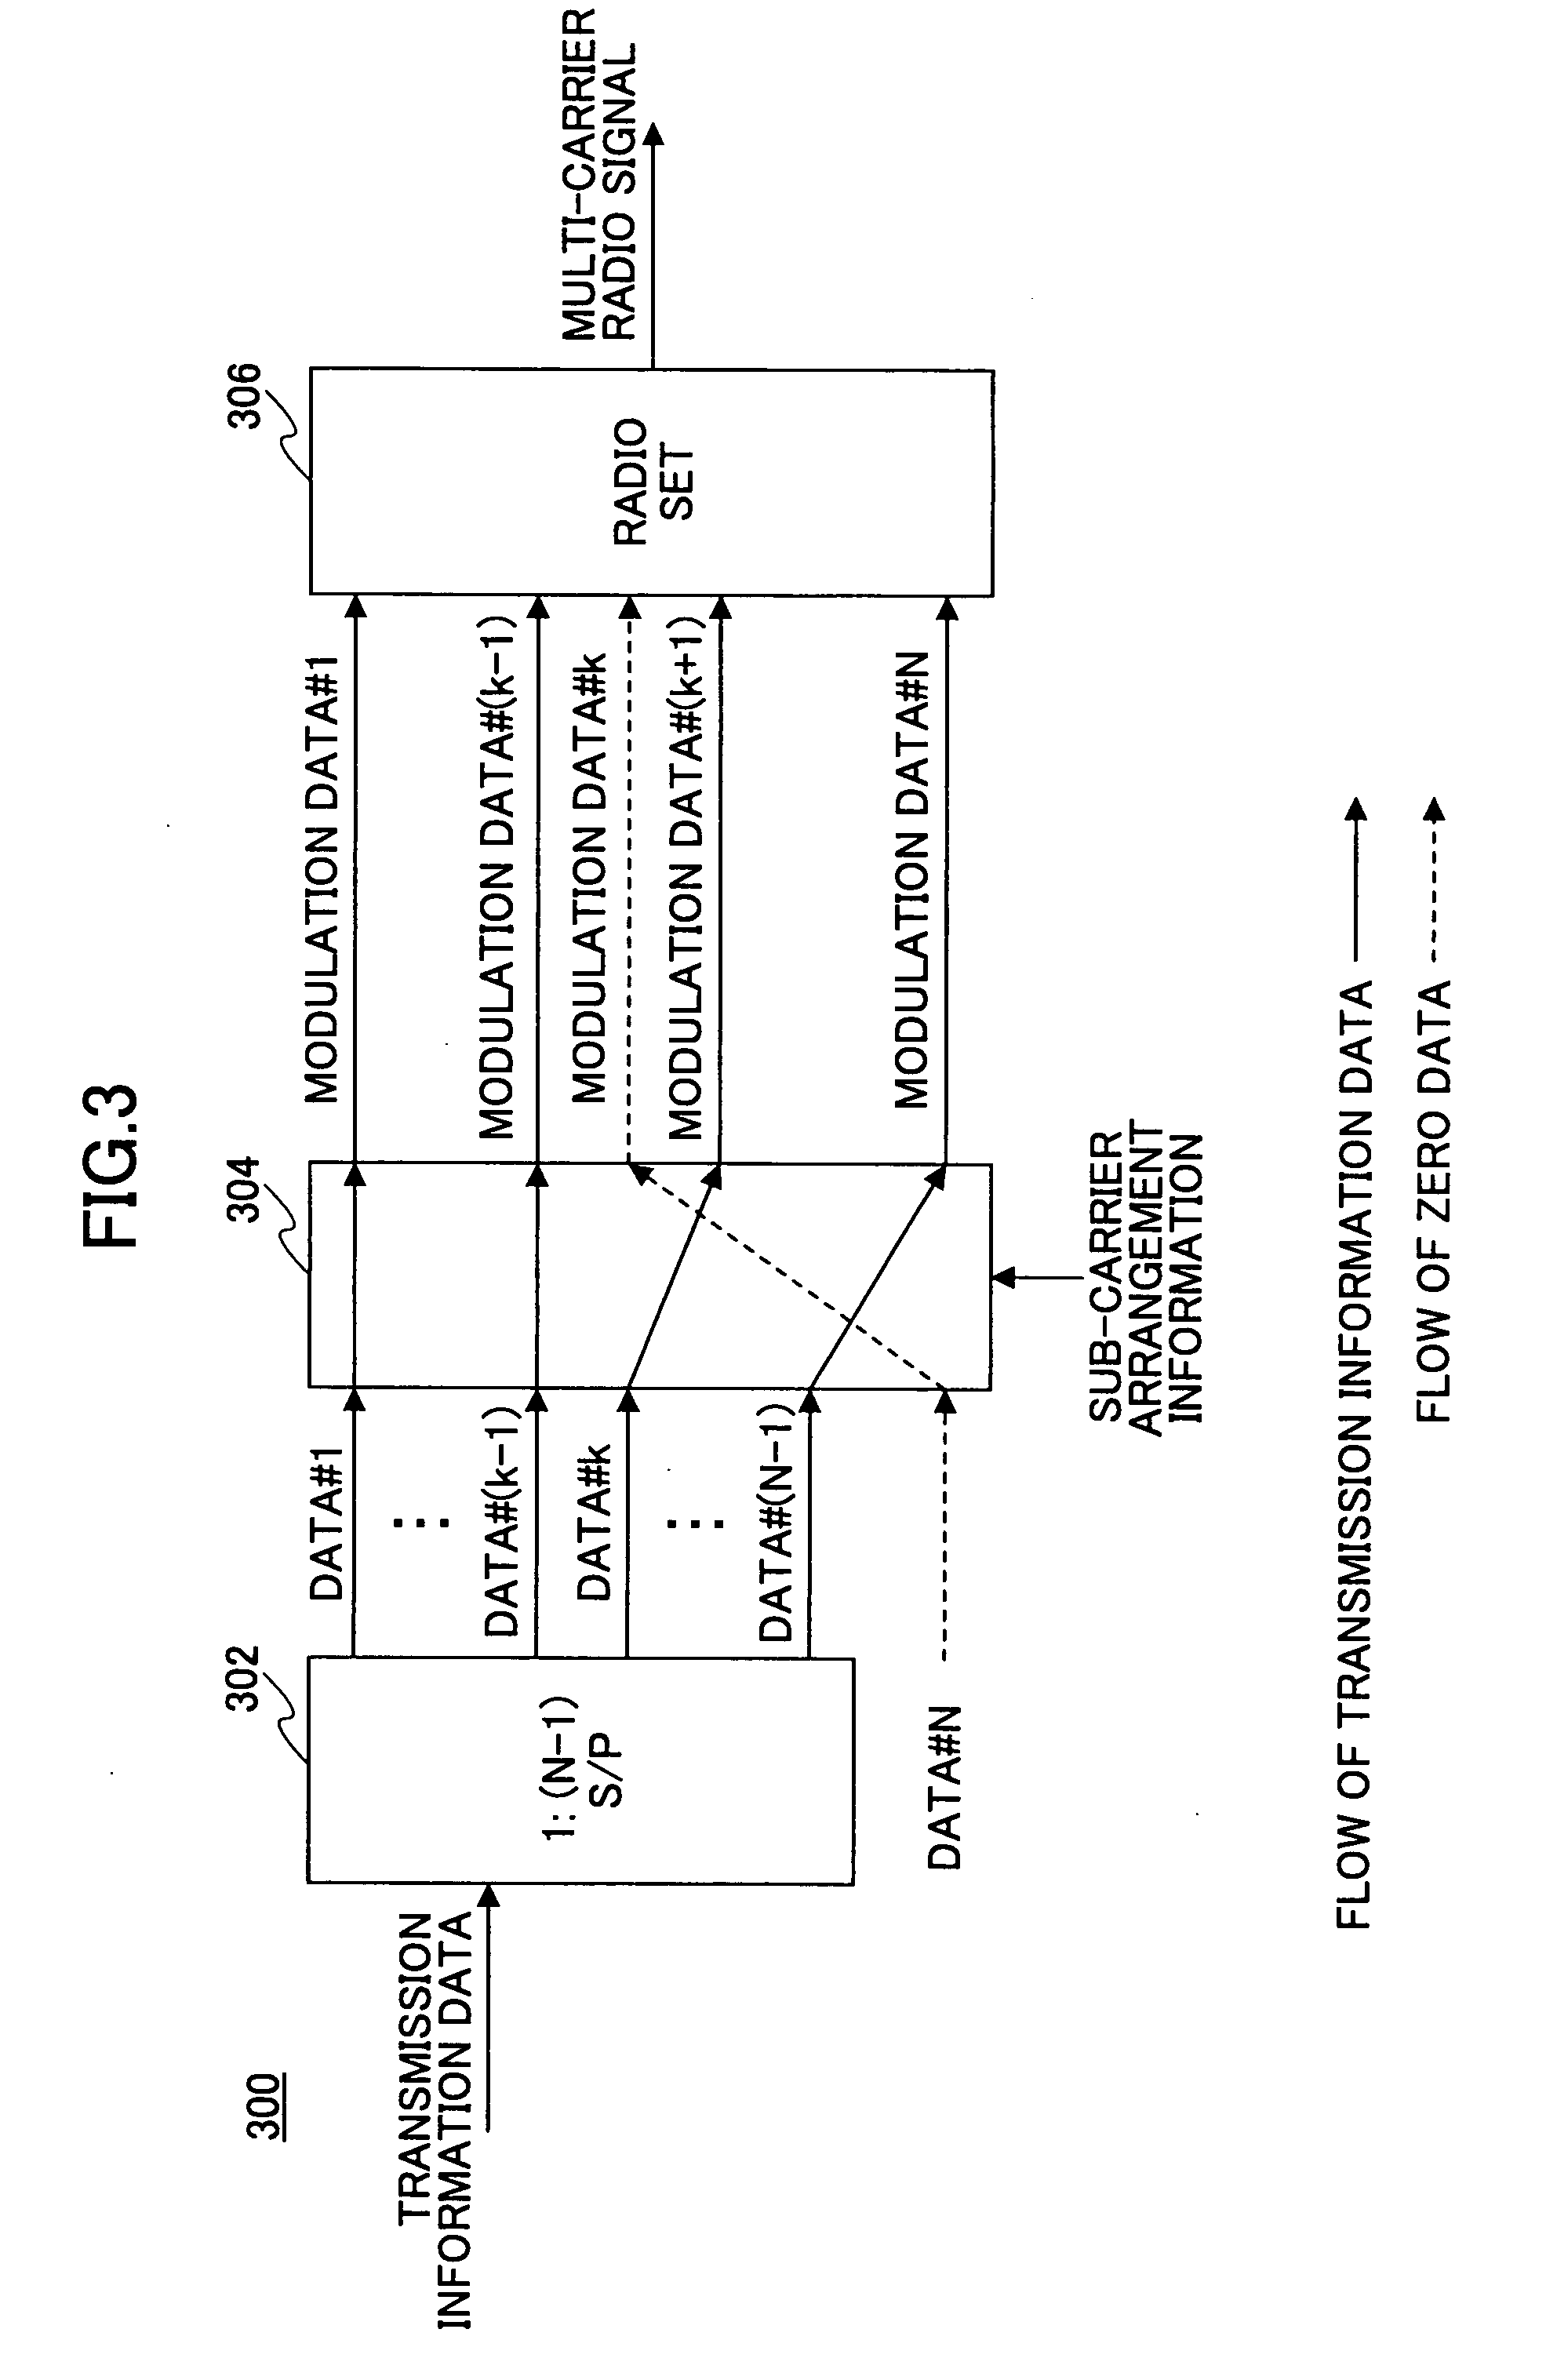 Multi-carrier radio transmission system, transmission device, and reception device